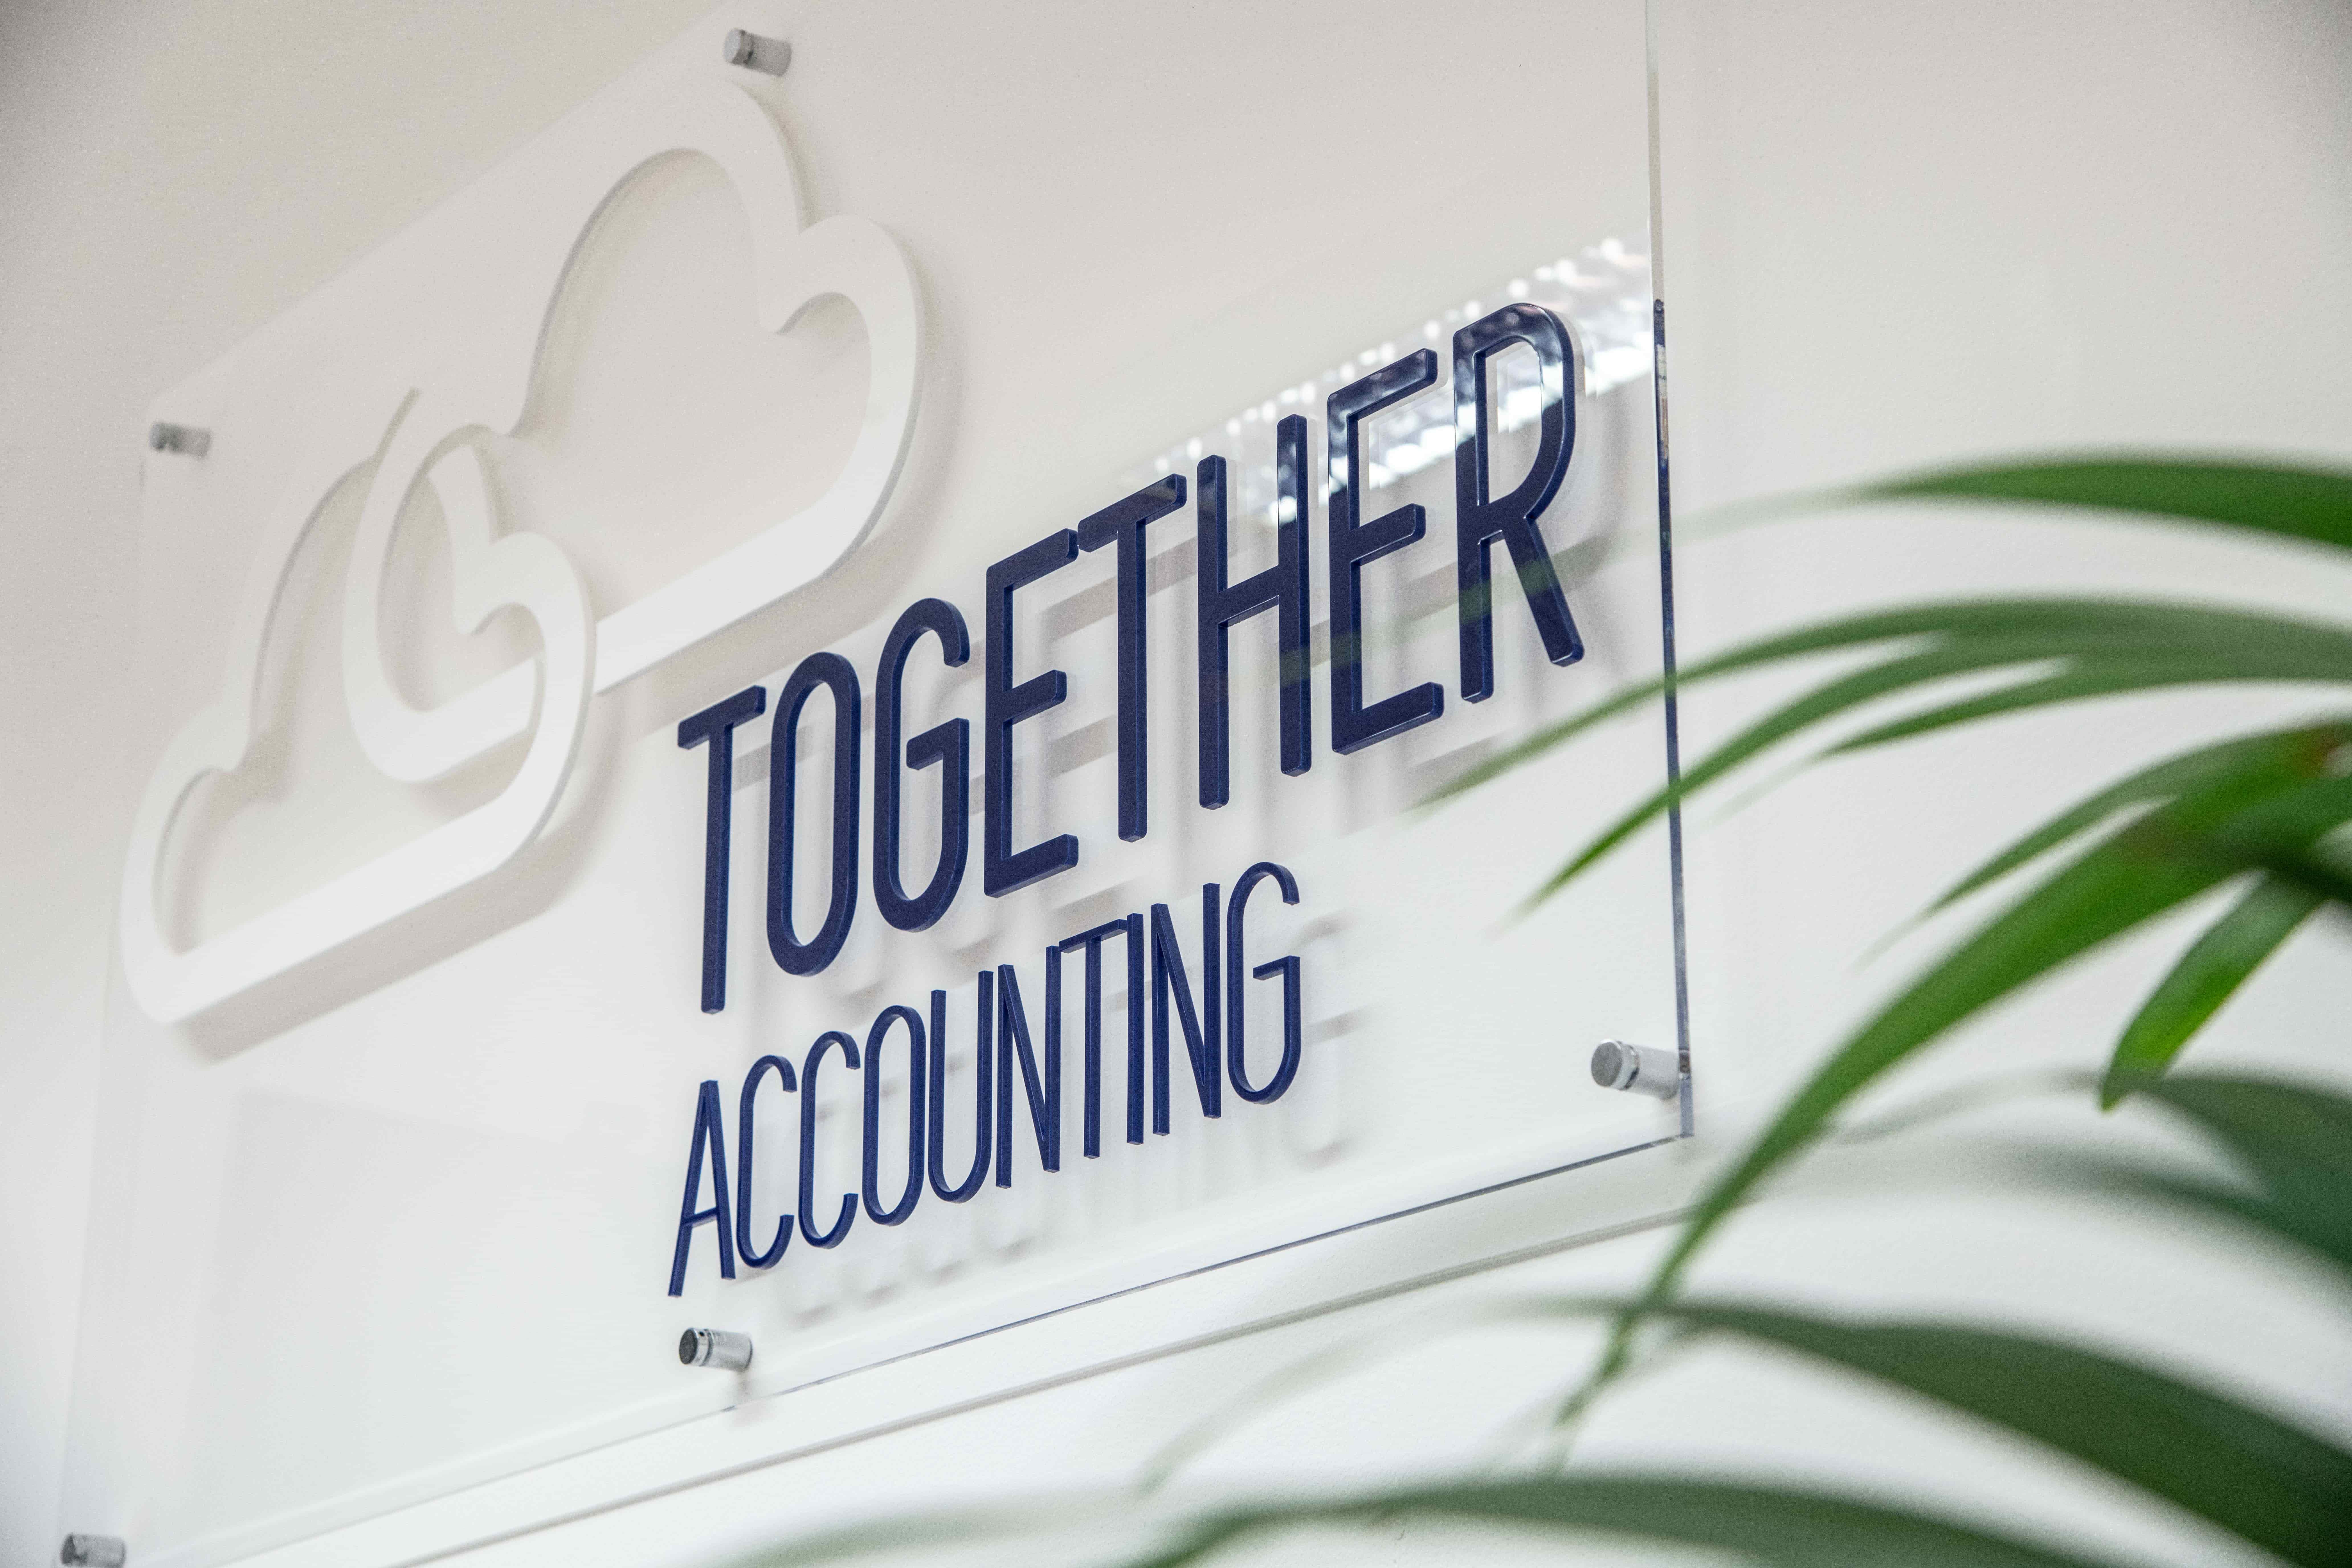 Main image for Together Accounting